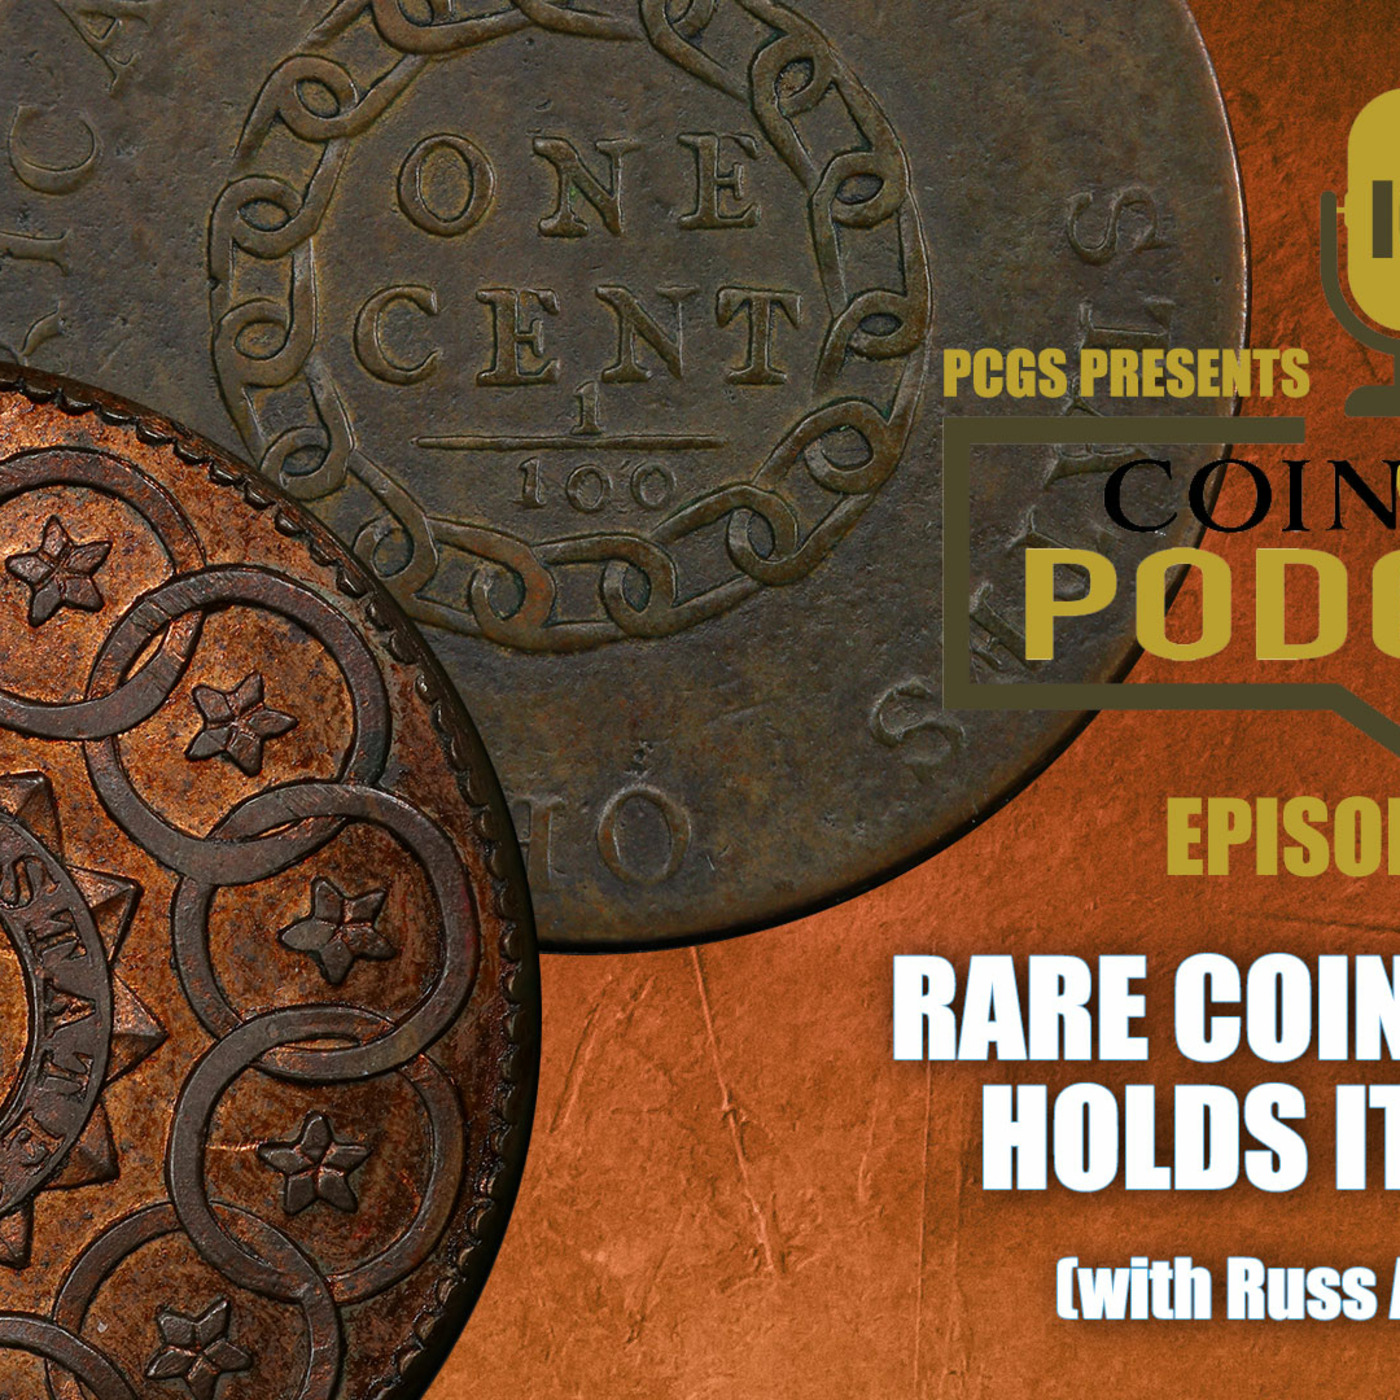 CoinWeek Podcast: The Coin Market Holds Its Own